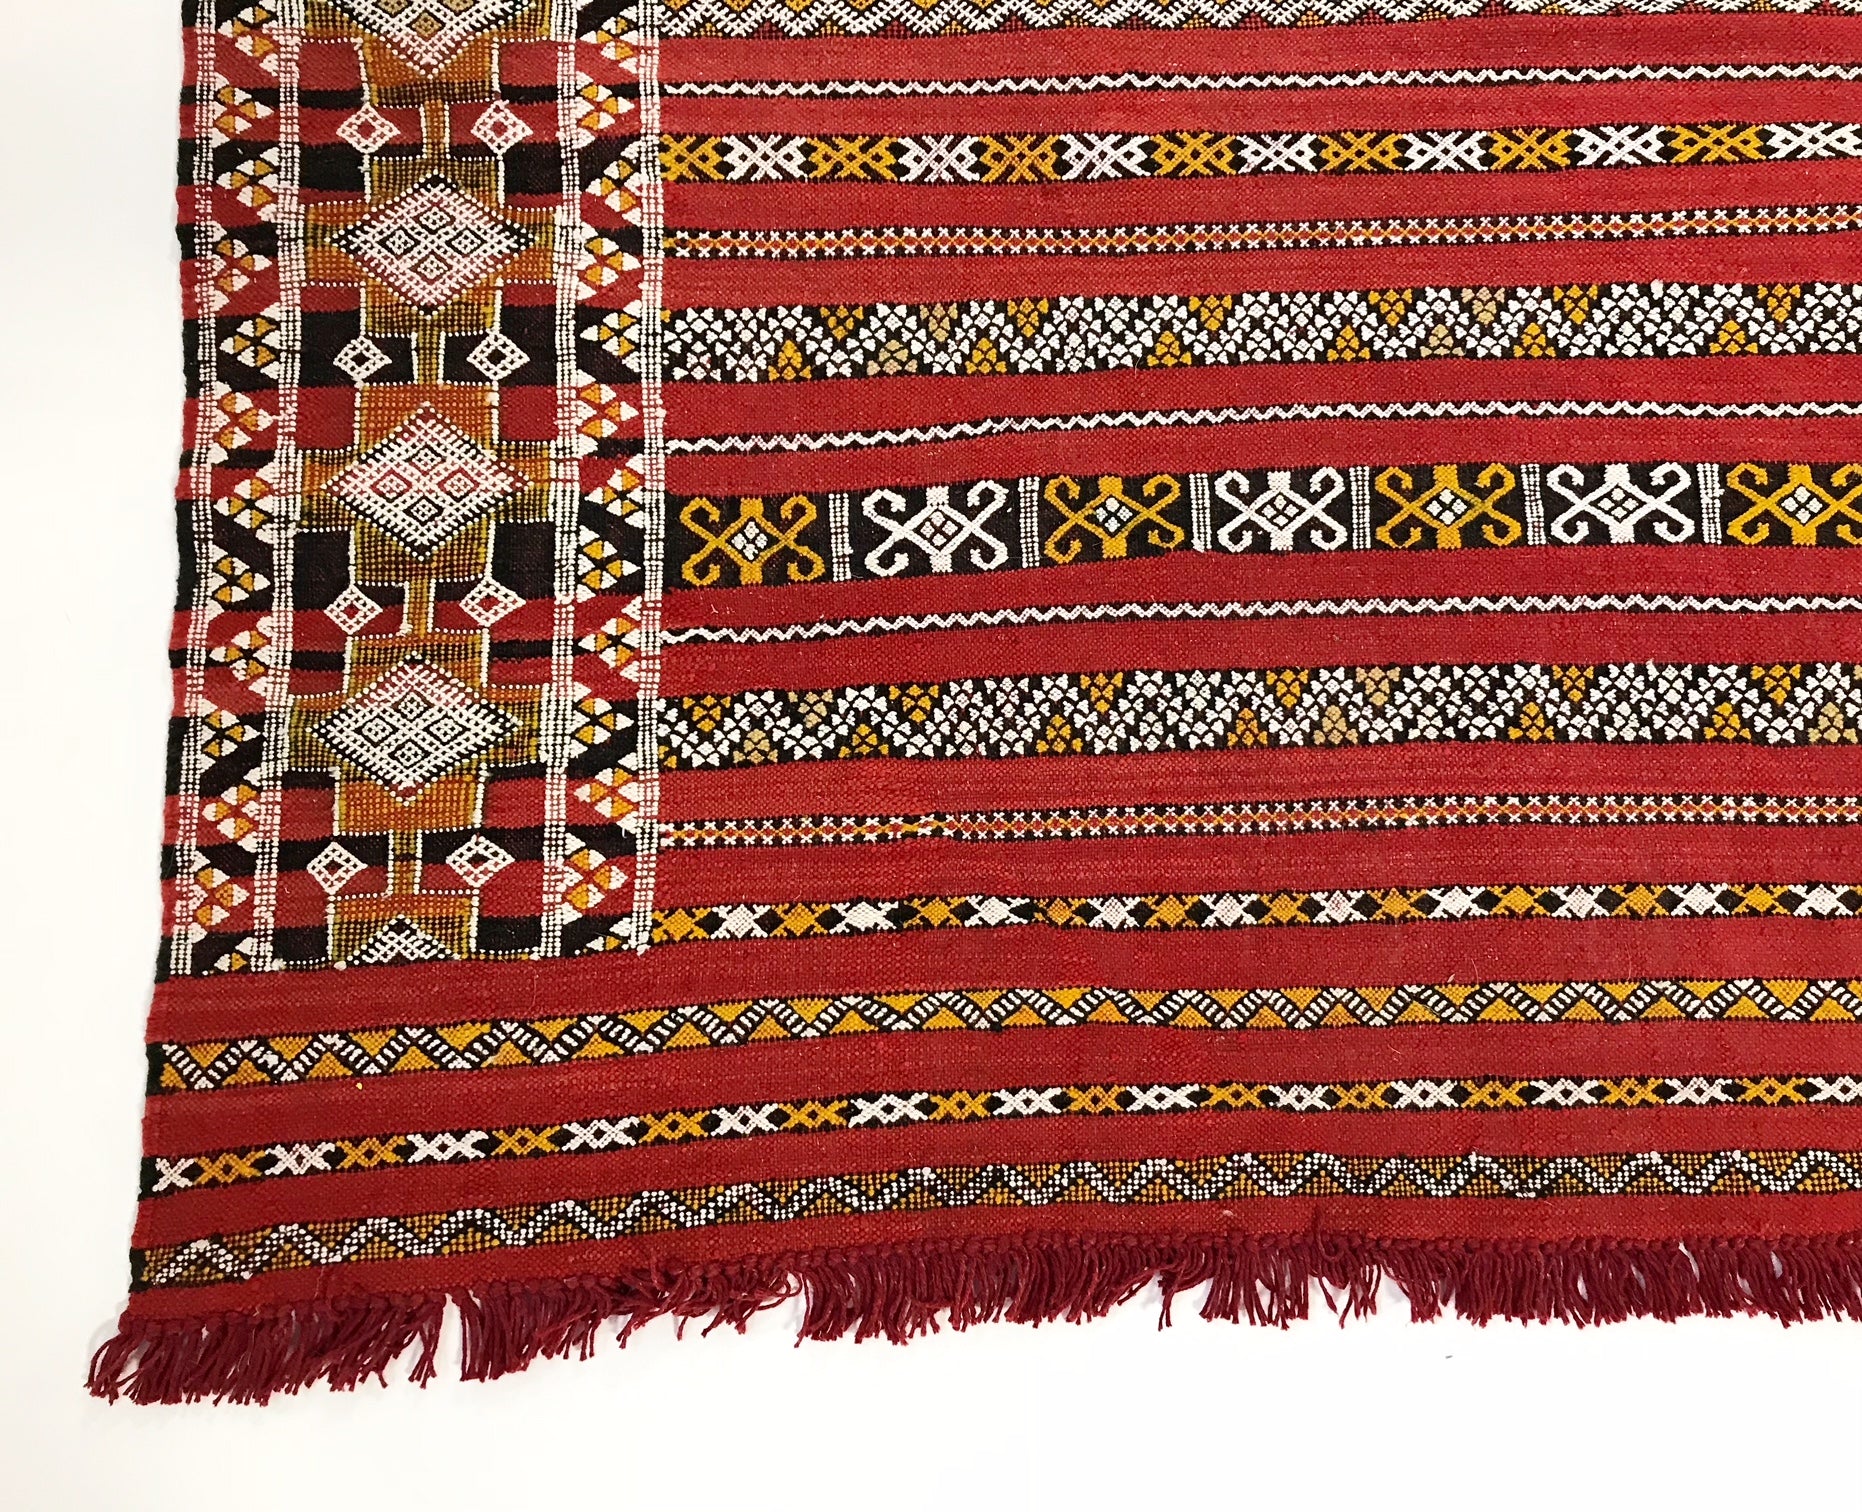 An Awesome Small Shop for Authentic Moroccan Kilim Rugs – Jess Keys